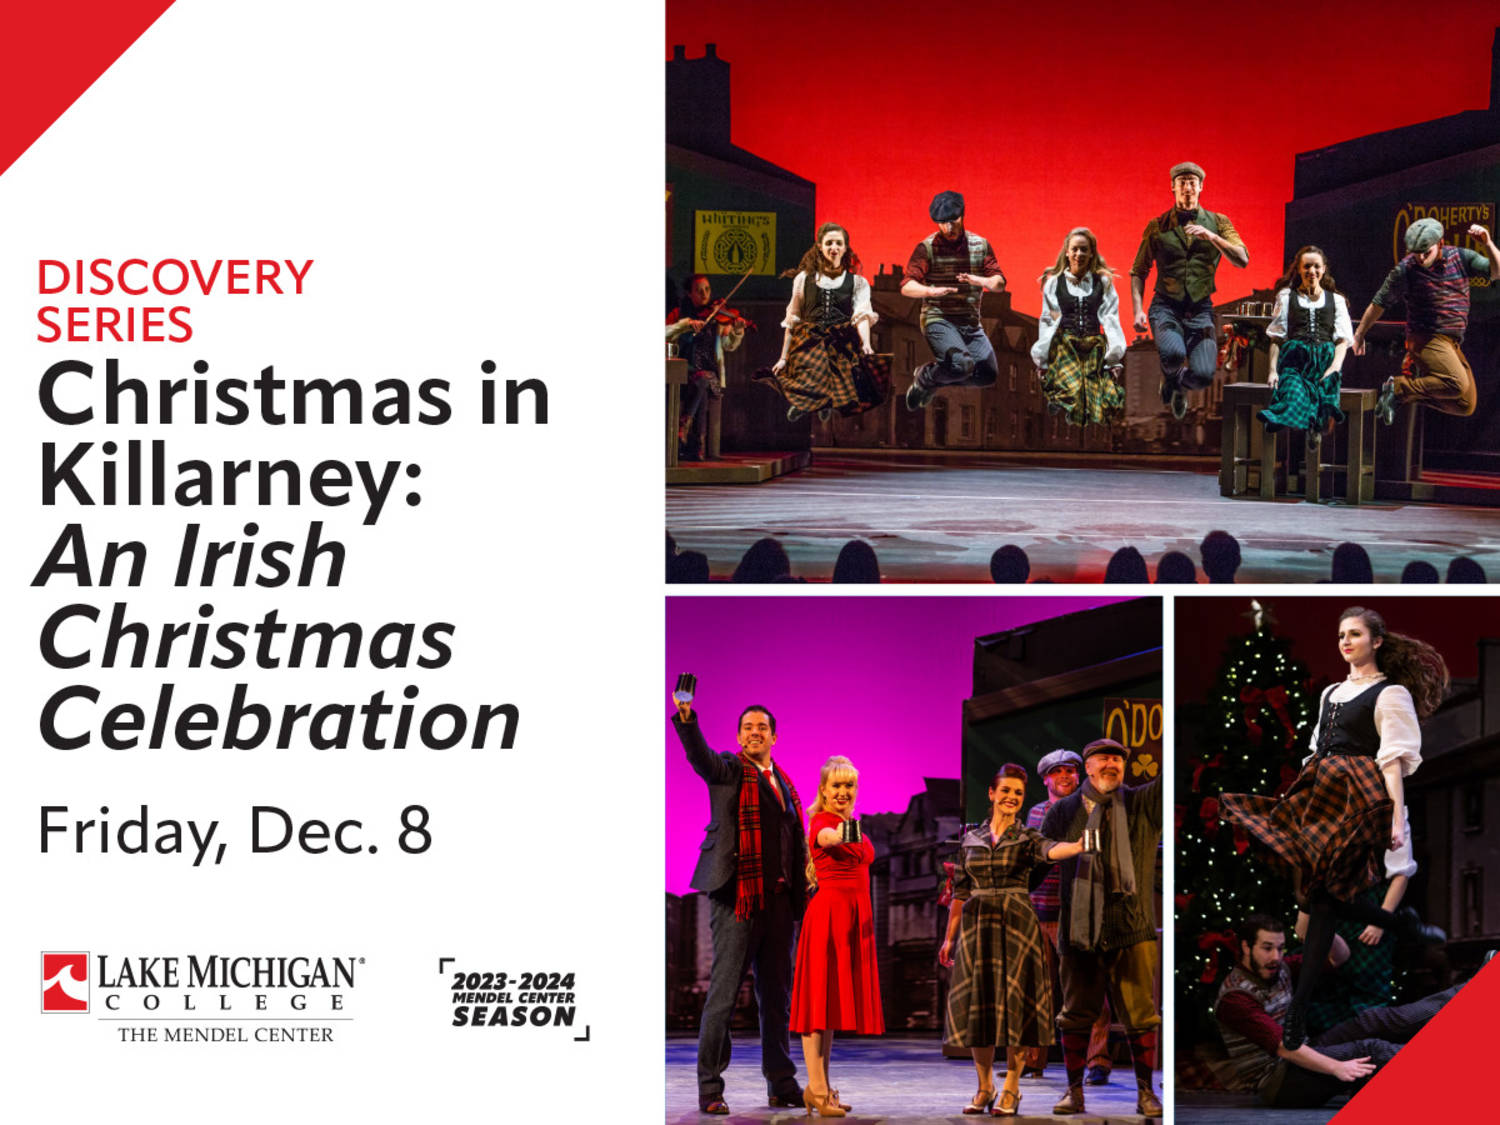 An evening of holiday-themed Irish dance and traditional songs comes to the Lake Michigan College Mendel Center Dec. 8